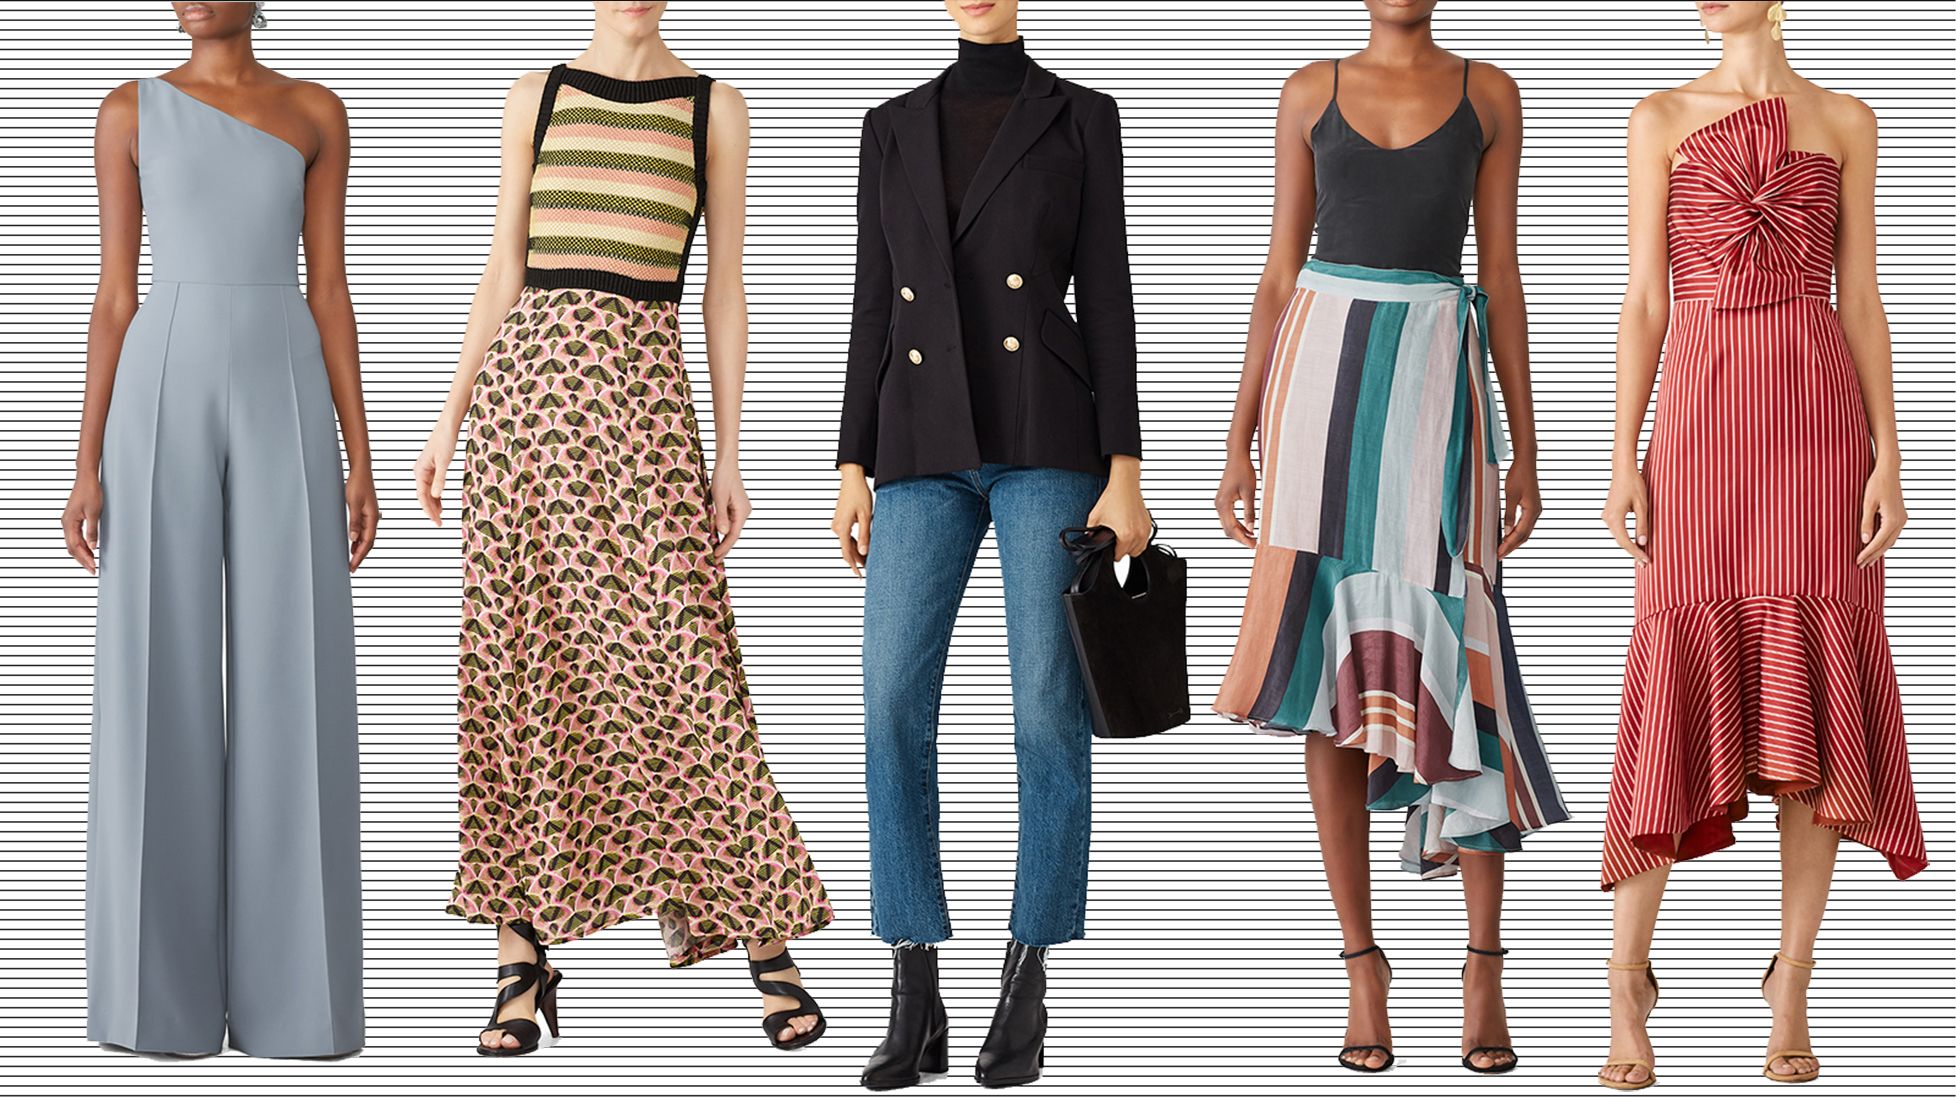 Rent the Runway's fashion comes to , including preworn items